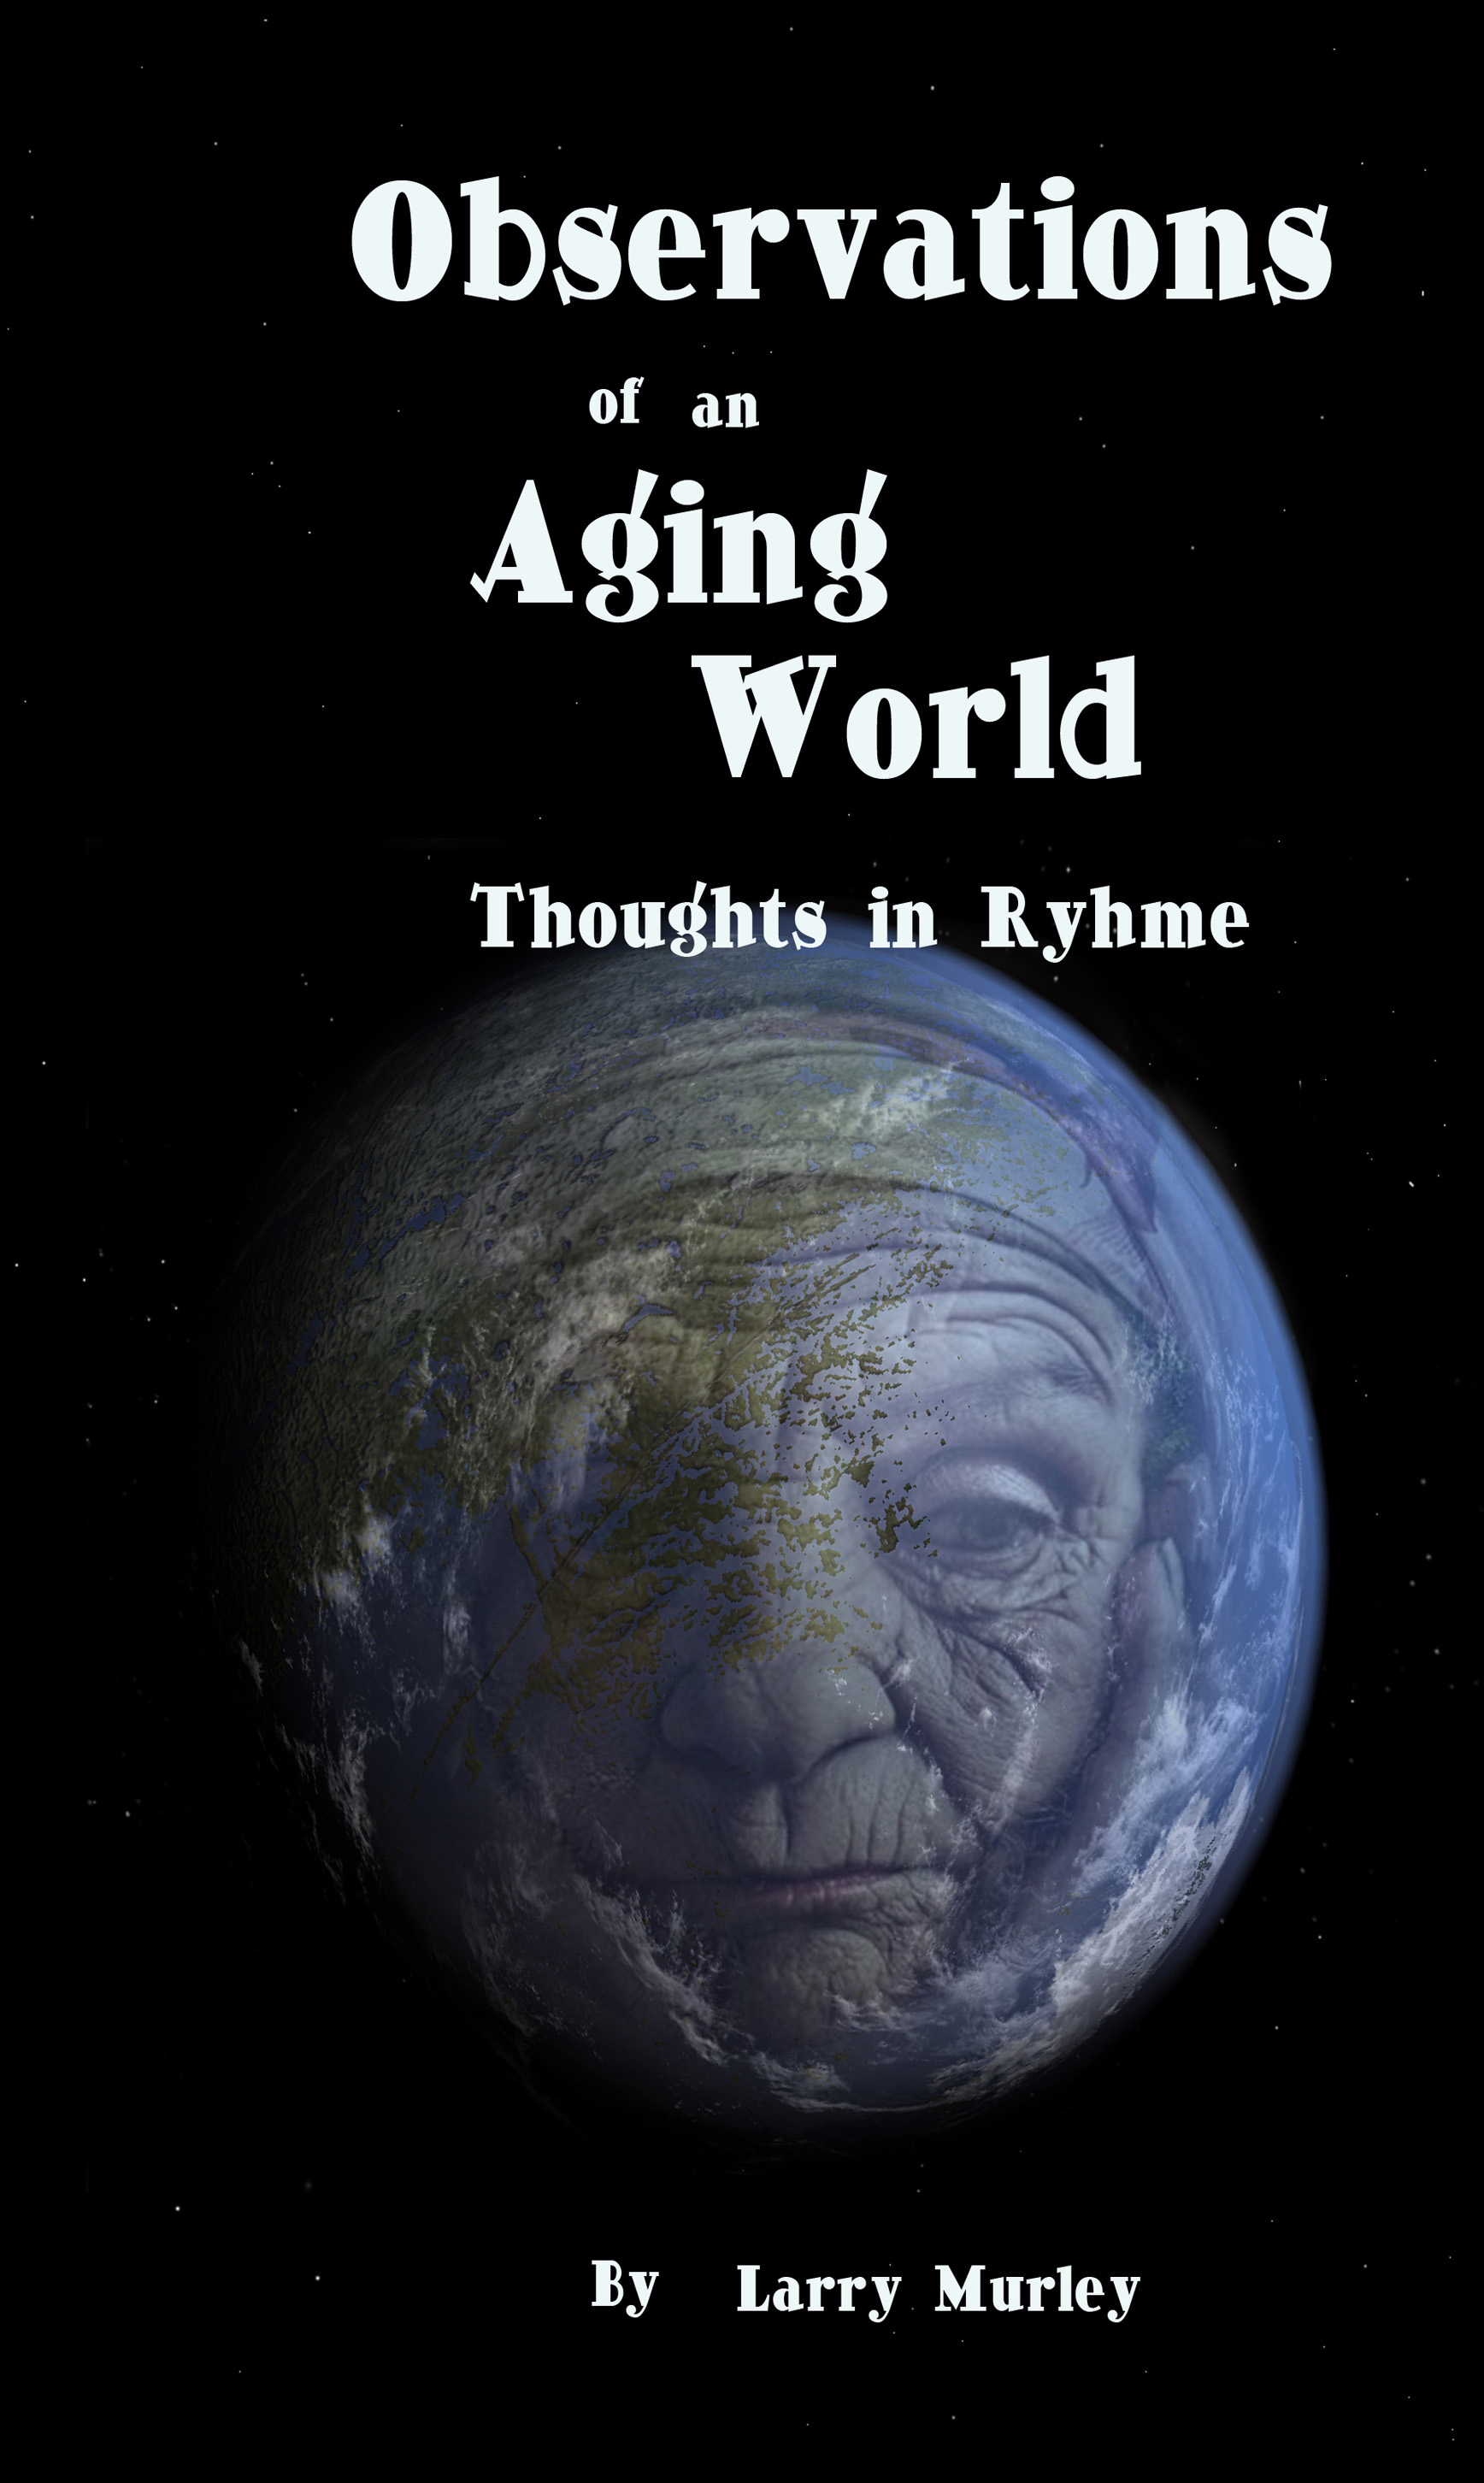 Observations of an Aging World - Thoughts in Rhyme by Larry Murley